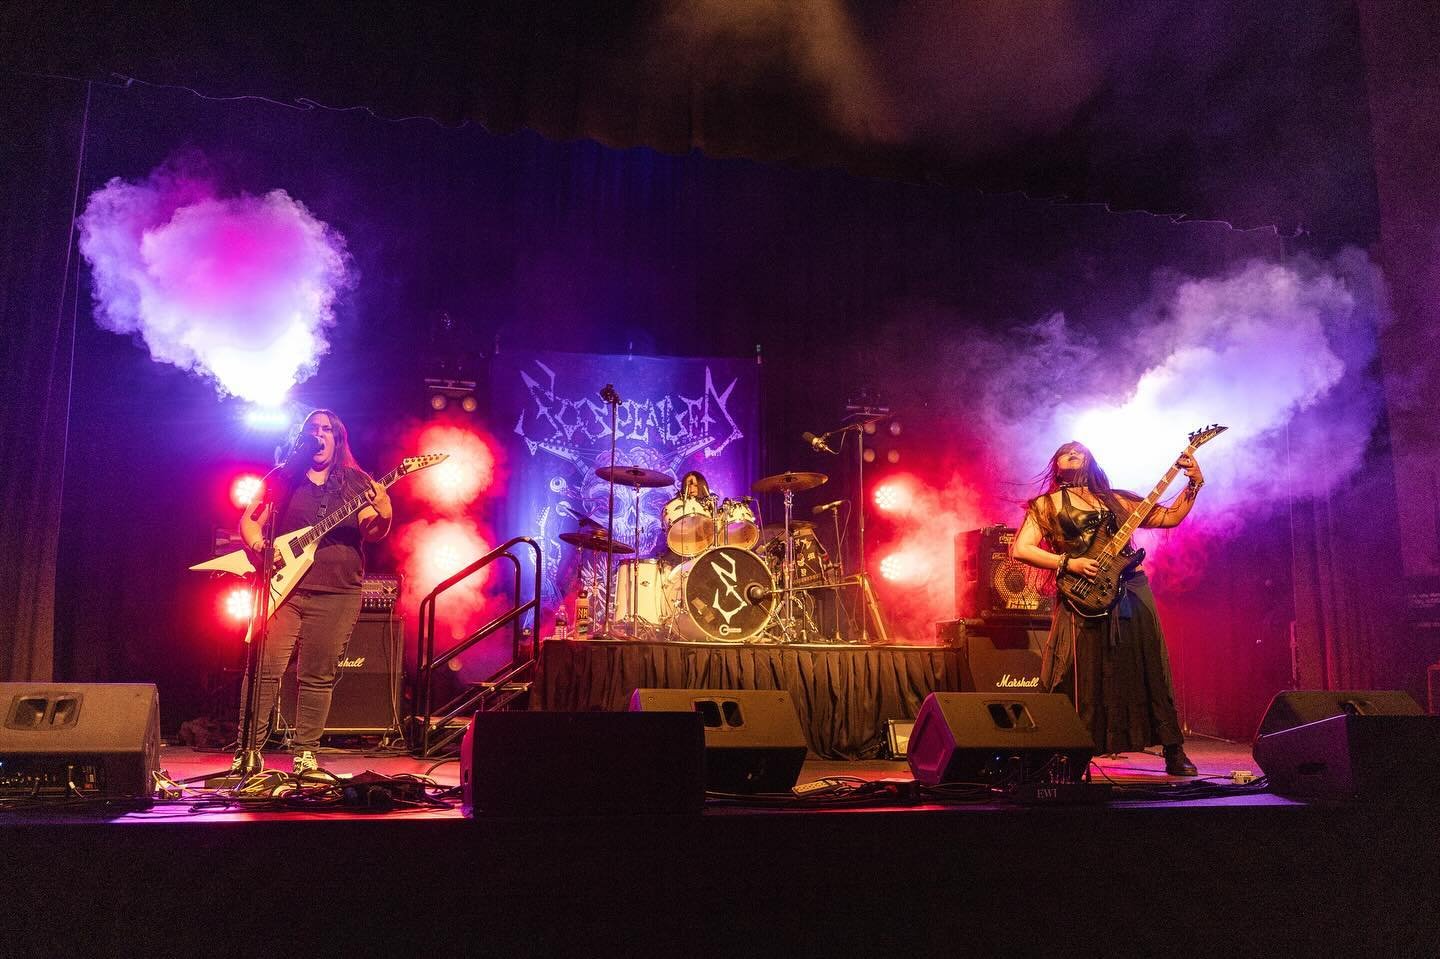 Last week, Peaks worked with @nau.ipllc to provide lightning and audio for the Rez-Metal Festival at NAU Ashurst Auditorium! 

Here are some shots from headliner @suspended_thrash&rsquo;s performance and our team working both FOH and backstage